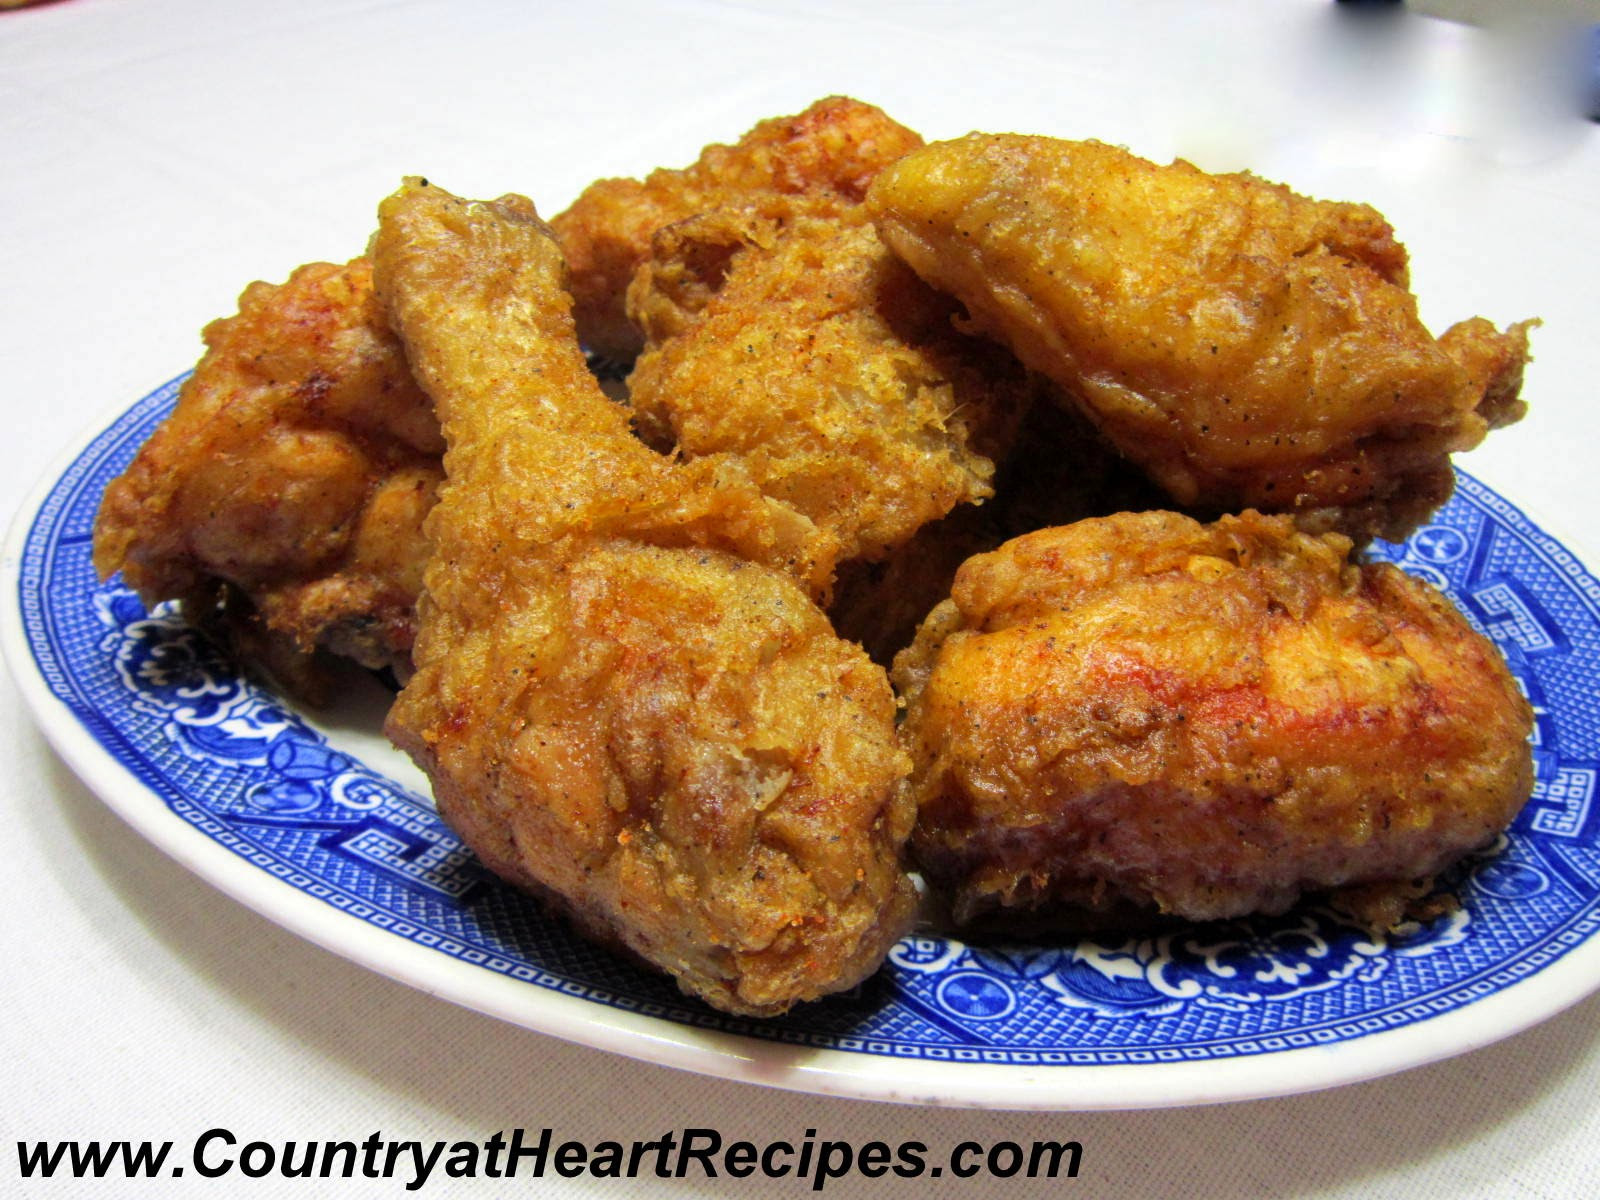 How To Make Fried Chicken Batter
 Country at Heart Recipes April 2015